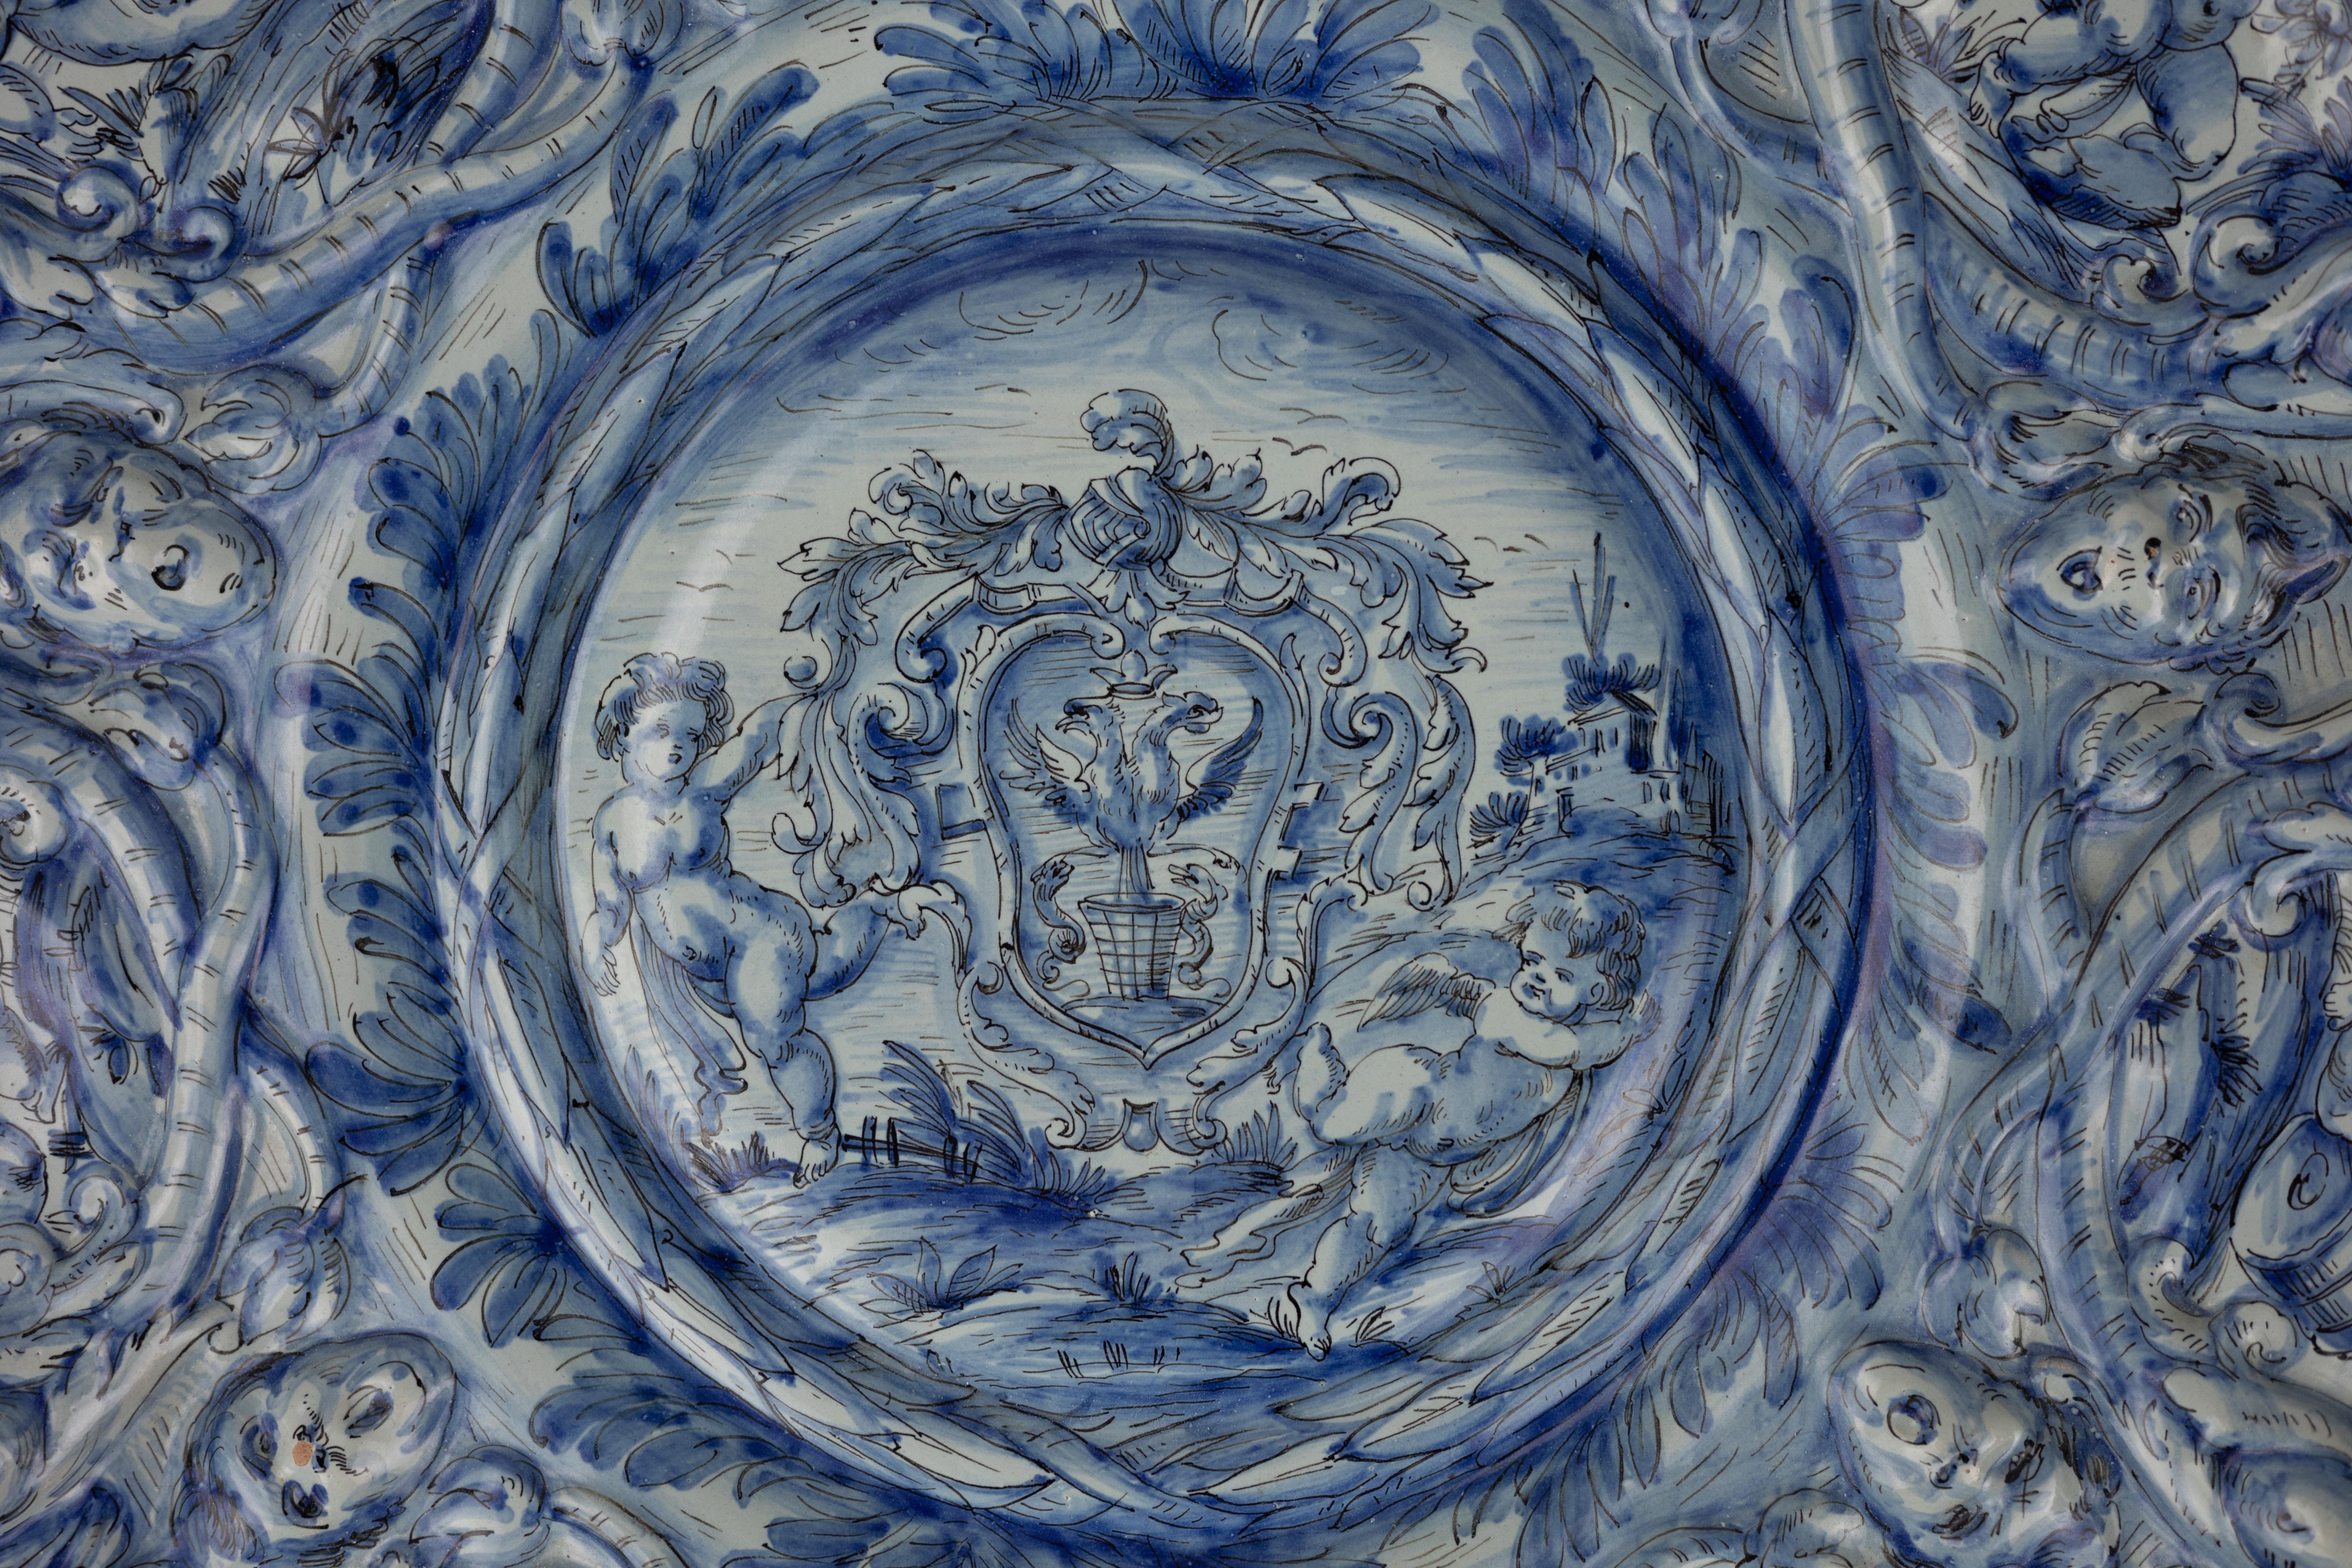 A monumental blue and white maiolica charger, made by Cantagalli, circa 1880. The charger is elaborately decorated with grotesques and putti molded in relief and a central armorial representing the Holy Roman Empire.

Ulisse Cantagalli was a